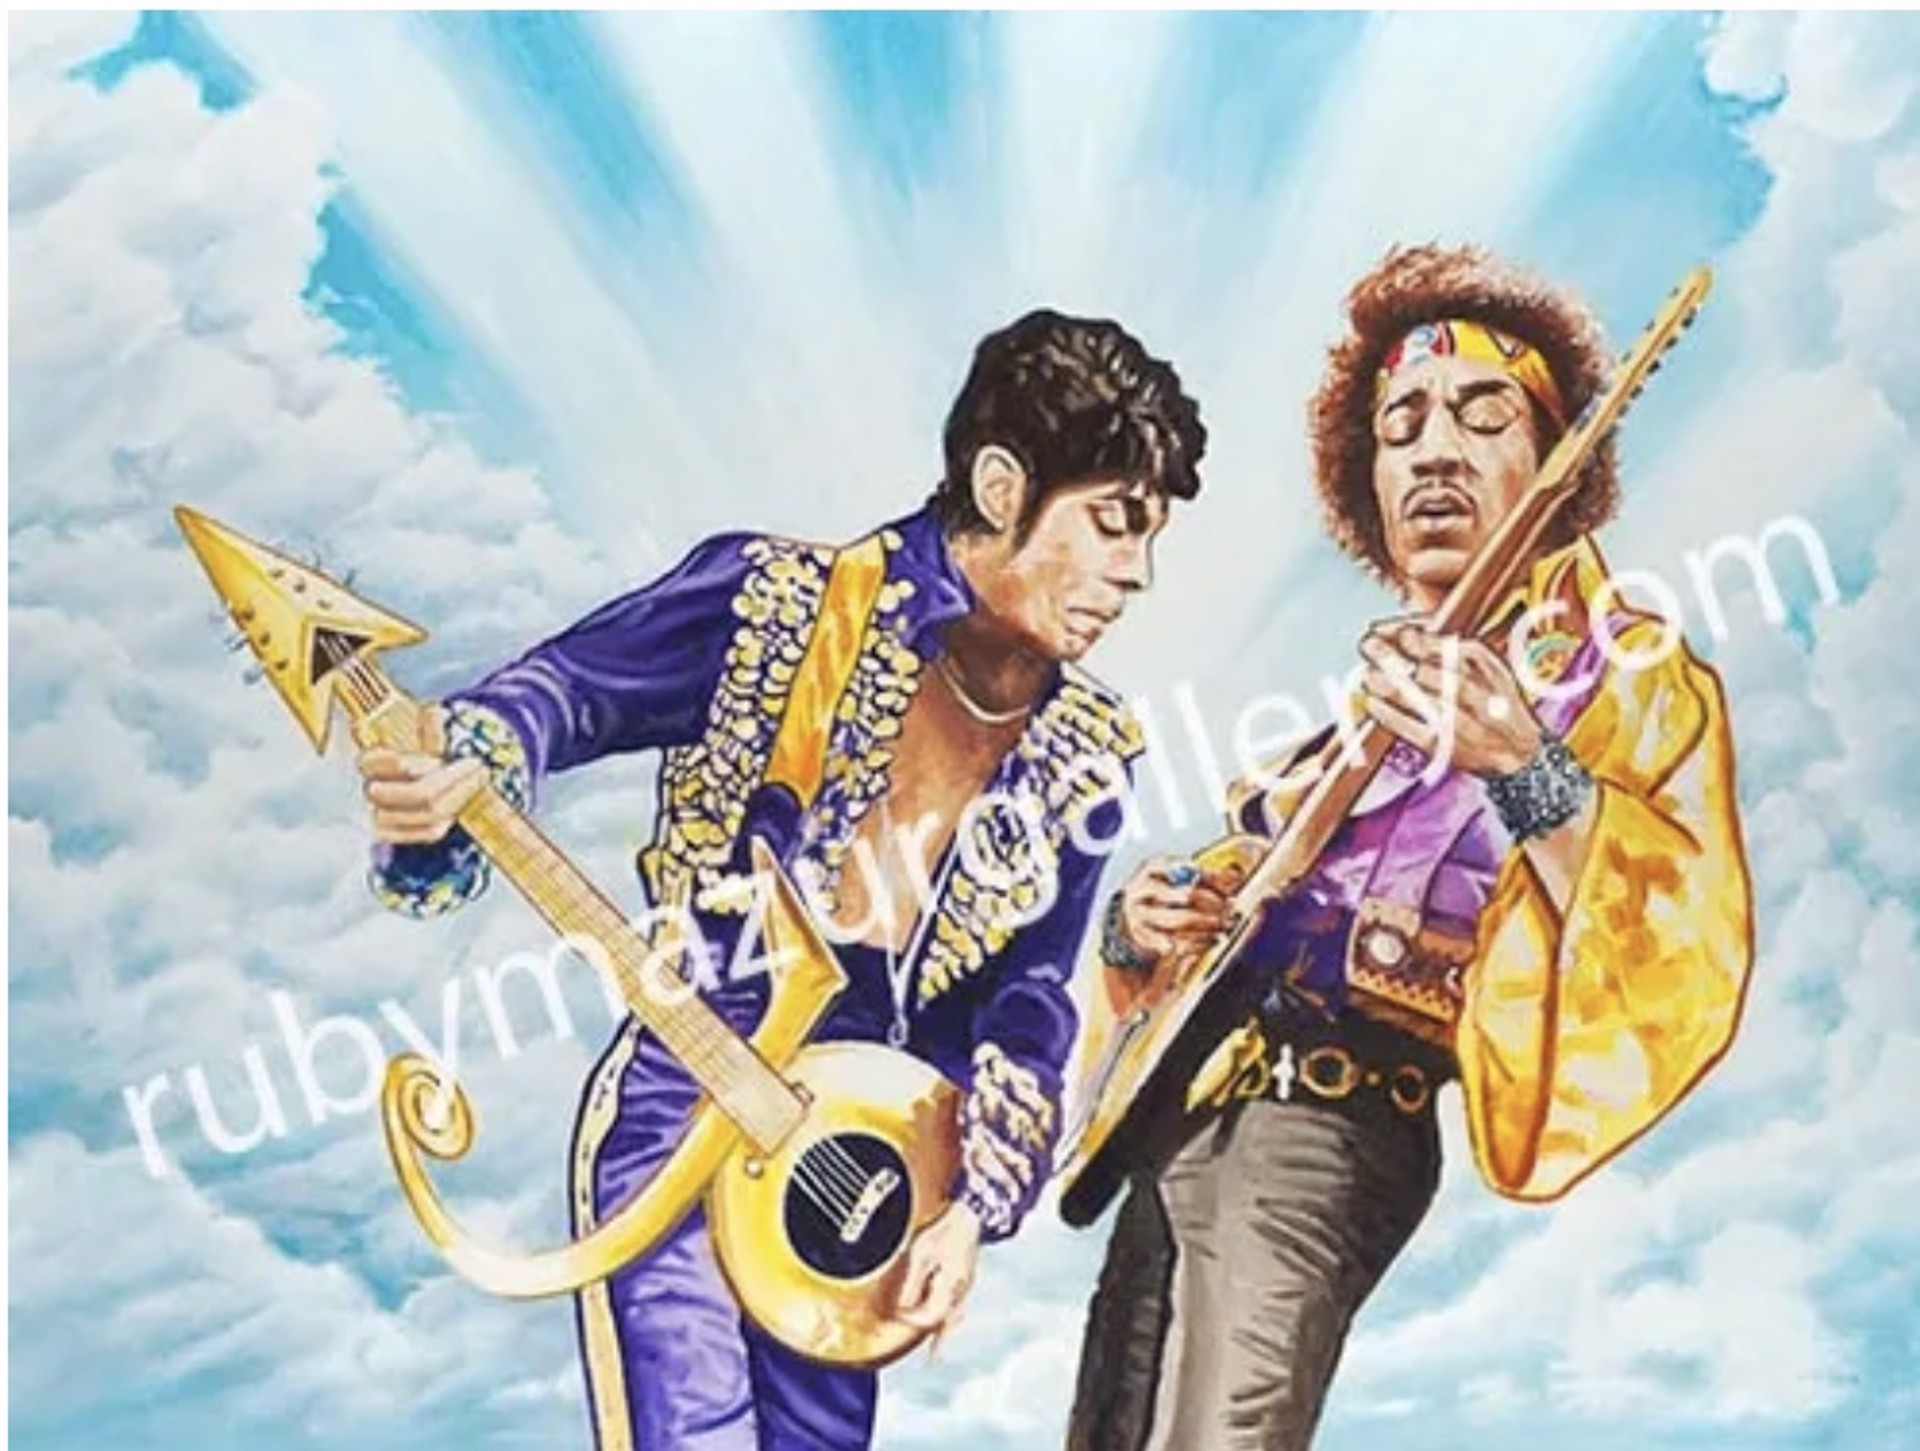 Prince and Jimi Hendrix by Ruby Mazur